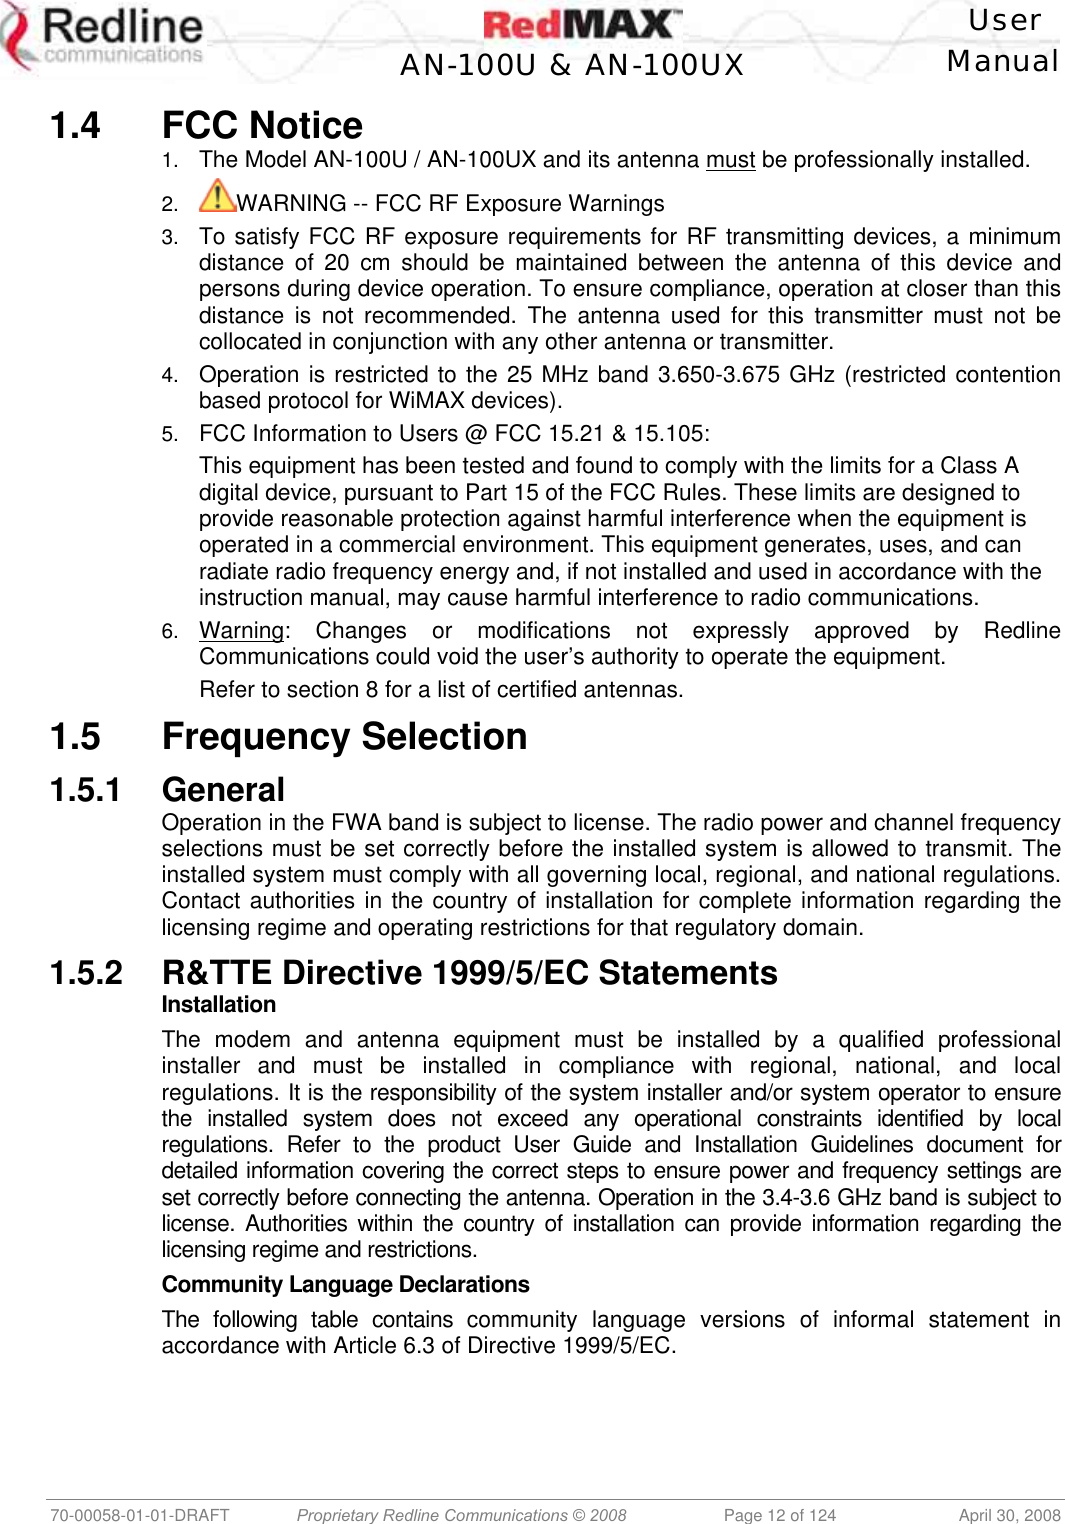    User  AN-100U &amp; AN-100UX Manual   70-00058-01-01-DRAFT  Proprietary Redline Communications © 2008   Page 12 of 124  April 30, 2008 1.4 FCC Notice 1.  The Model AN-100U / AN-100UX and its antenna must be professionally installed. 2.  WARNING -- FCC RF Exposure Warnings 3.  To satisfy FCC RF exposure requirements for RF transmitting devices, a minimum distance of 20 cm should be maintained between the antenna of this device and persons during device operation. To ensure compliance, operation at closer than this distance is not recommended. The antenna used for this transmitter must not be collocated in conjunction with any other antenna or transmitter. 4.  Operation is restricted to the 25 MHz band 3.650-3.675 GHz (restricted contention based protocol for WiMAX devices). 5.  FCC Information to Users @ FCC 15.21 &amp; 15.105: This equipment has been tested and found to comply with the limits for a Class A digital device, pursuant to Part 15 of the FCC Rules. These limits are designed to provide reasonable protection against harmful interference when the equipment is operated in a commercial environment. This equipment generates, uses, and can radiate radio frequency energy and, if not installed and used in accordance with the instruction manual, may cause harmful interference to radio communications. 6.  Warning: Changes or modifications not expressly approved by Redline Communications could void the user’s authority to operate the equipment. Refer to section 8 for a list of certified antennas. 1.5 Frequency Selection 1.5.1 General Operation in the FWA band is subject to license. The radio power and channel frequency selections must be set correctly before the installed system is allowed to transmit. The installed system must comply with all governing local, regional, and national regulations. Contact authorities in the country of installation for complete information regarding the licensing regime and operating restrictions for that regulatory domain. 1.5.2  R&amp;TTE Directive 1999/5/EC Statements Installation The modem and antenna equipment must be installed by a qualified professional installer and must be installed in compliance with regional, national, and local regulations. It is the responsibility of the system installer and/or system operator to ensure the installed system does not exceed any operational constraints identified by local regulations. Refer to the product User Guide and Installation Guidelines document for detailed information covering the correct steps to ensure power and frequency settings are set correctly before connecting the antenna. Operation in the 3.4-3.6 GHz band is subject to license. Authorities within the country of installation can provide information regarding the licensing regime and restrictions. Community Language Declarations The following table contains community language versions of informal statement in accordance with Article 6.3 of Directive 1999/5/EC. 